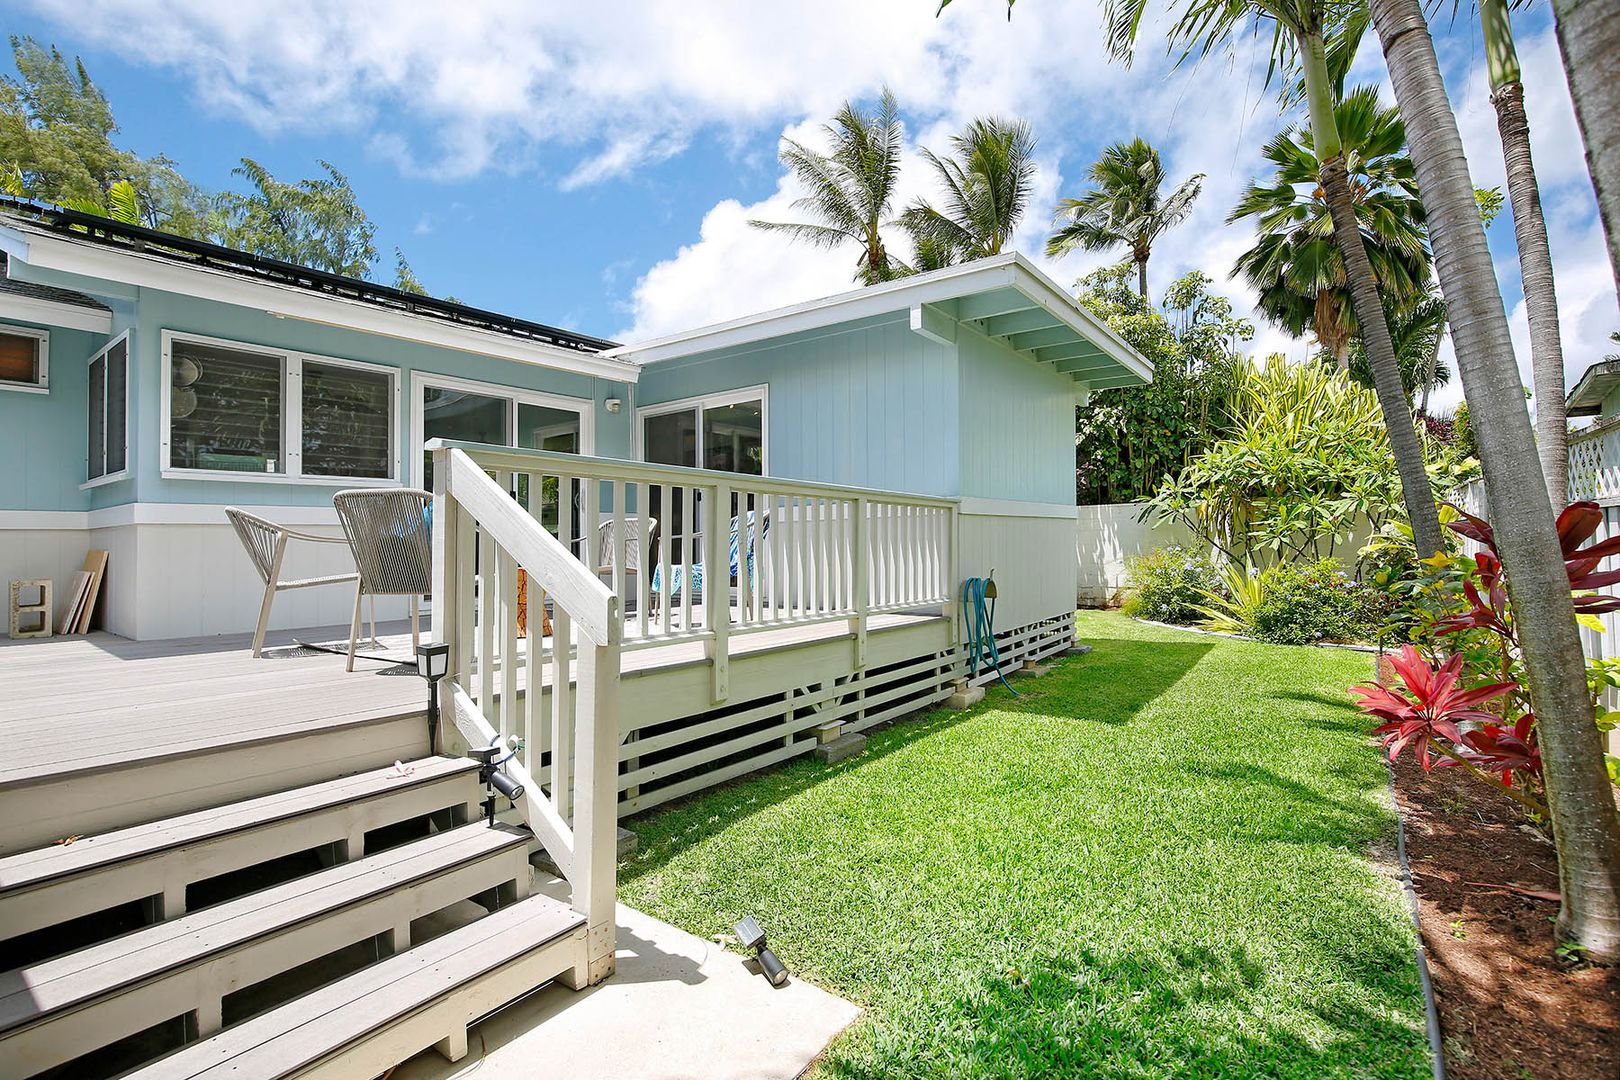 3 Bedroom, 3 Bath Single Family Home with Fenced Yard and Walking Distance to Kailua Beach